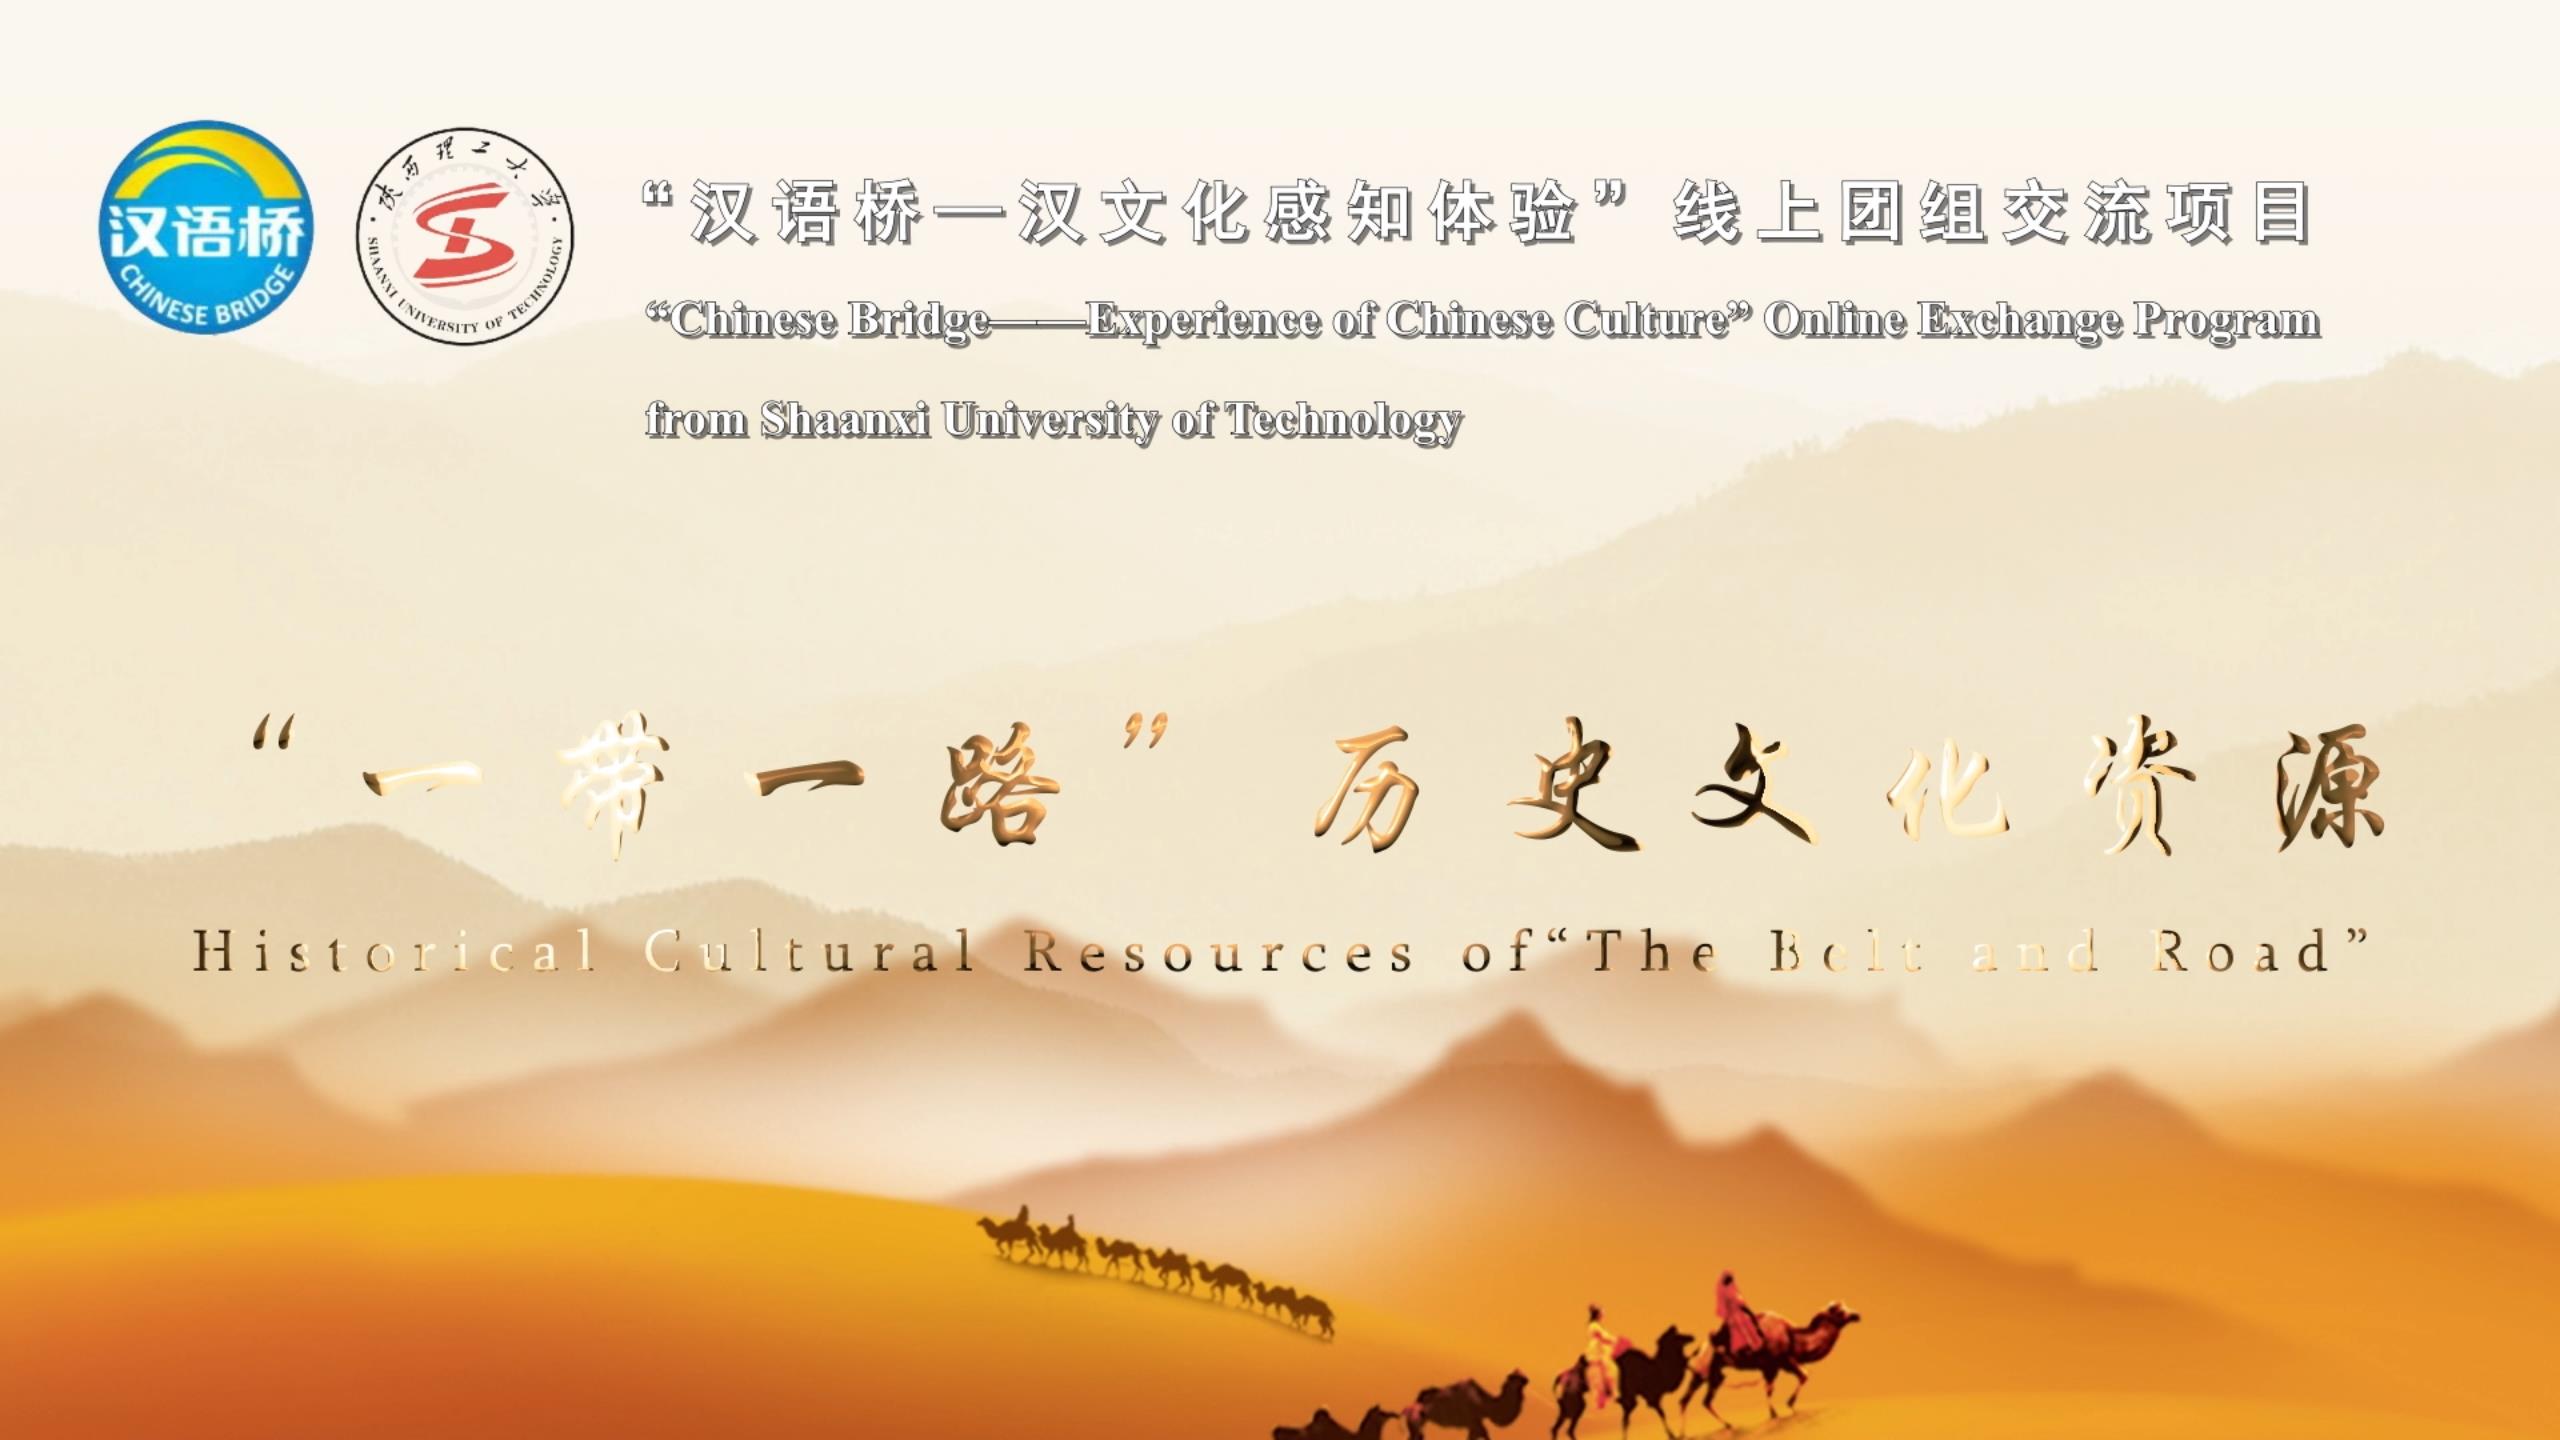 Historical and Cultural Resources of the Belt and Road